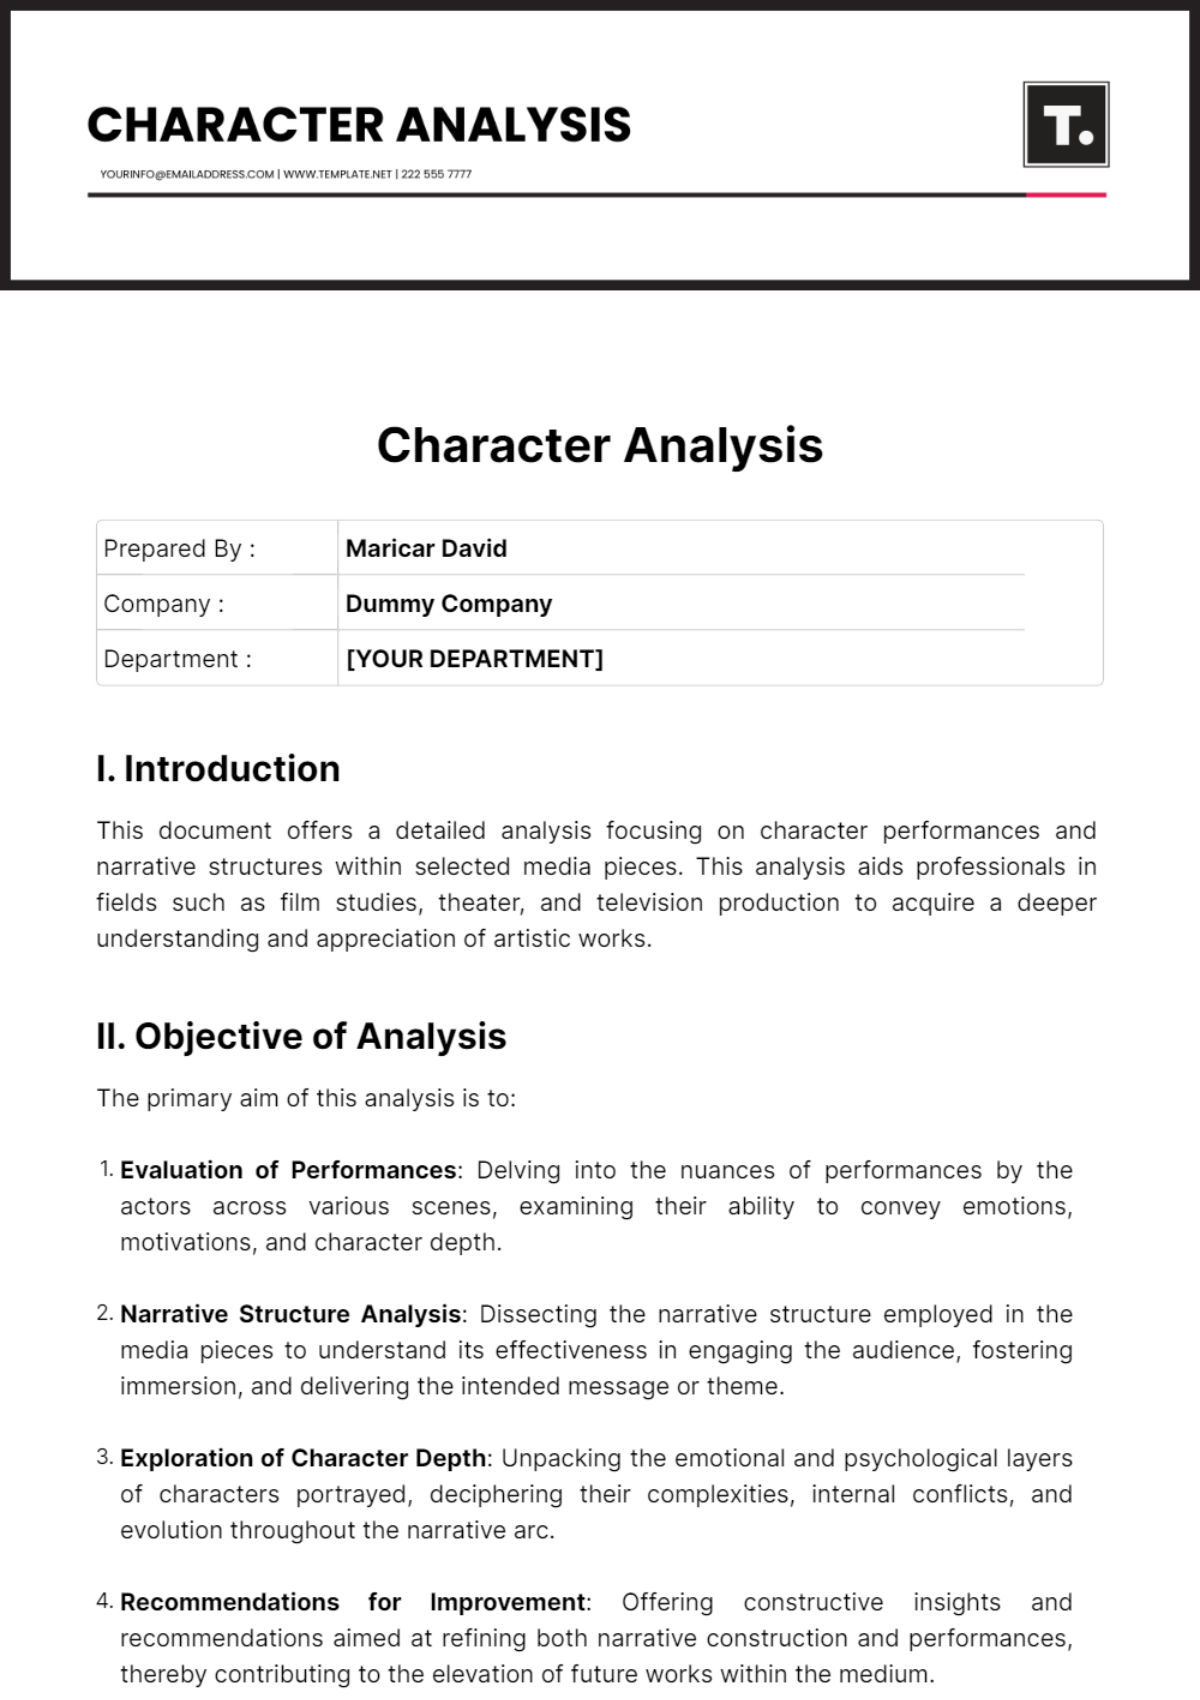 Character Analysis Template